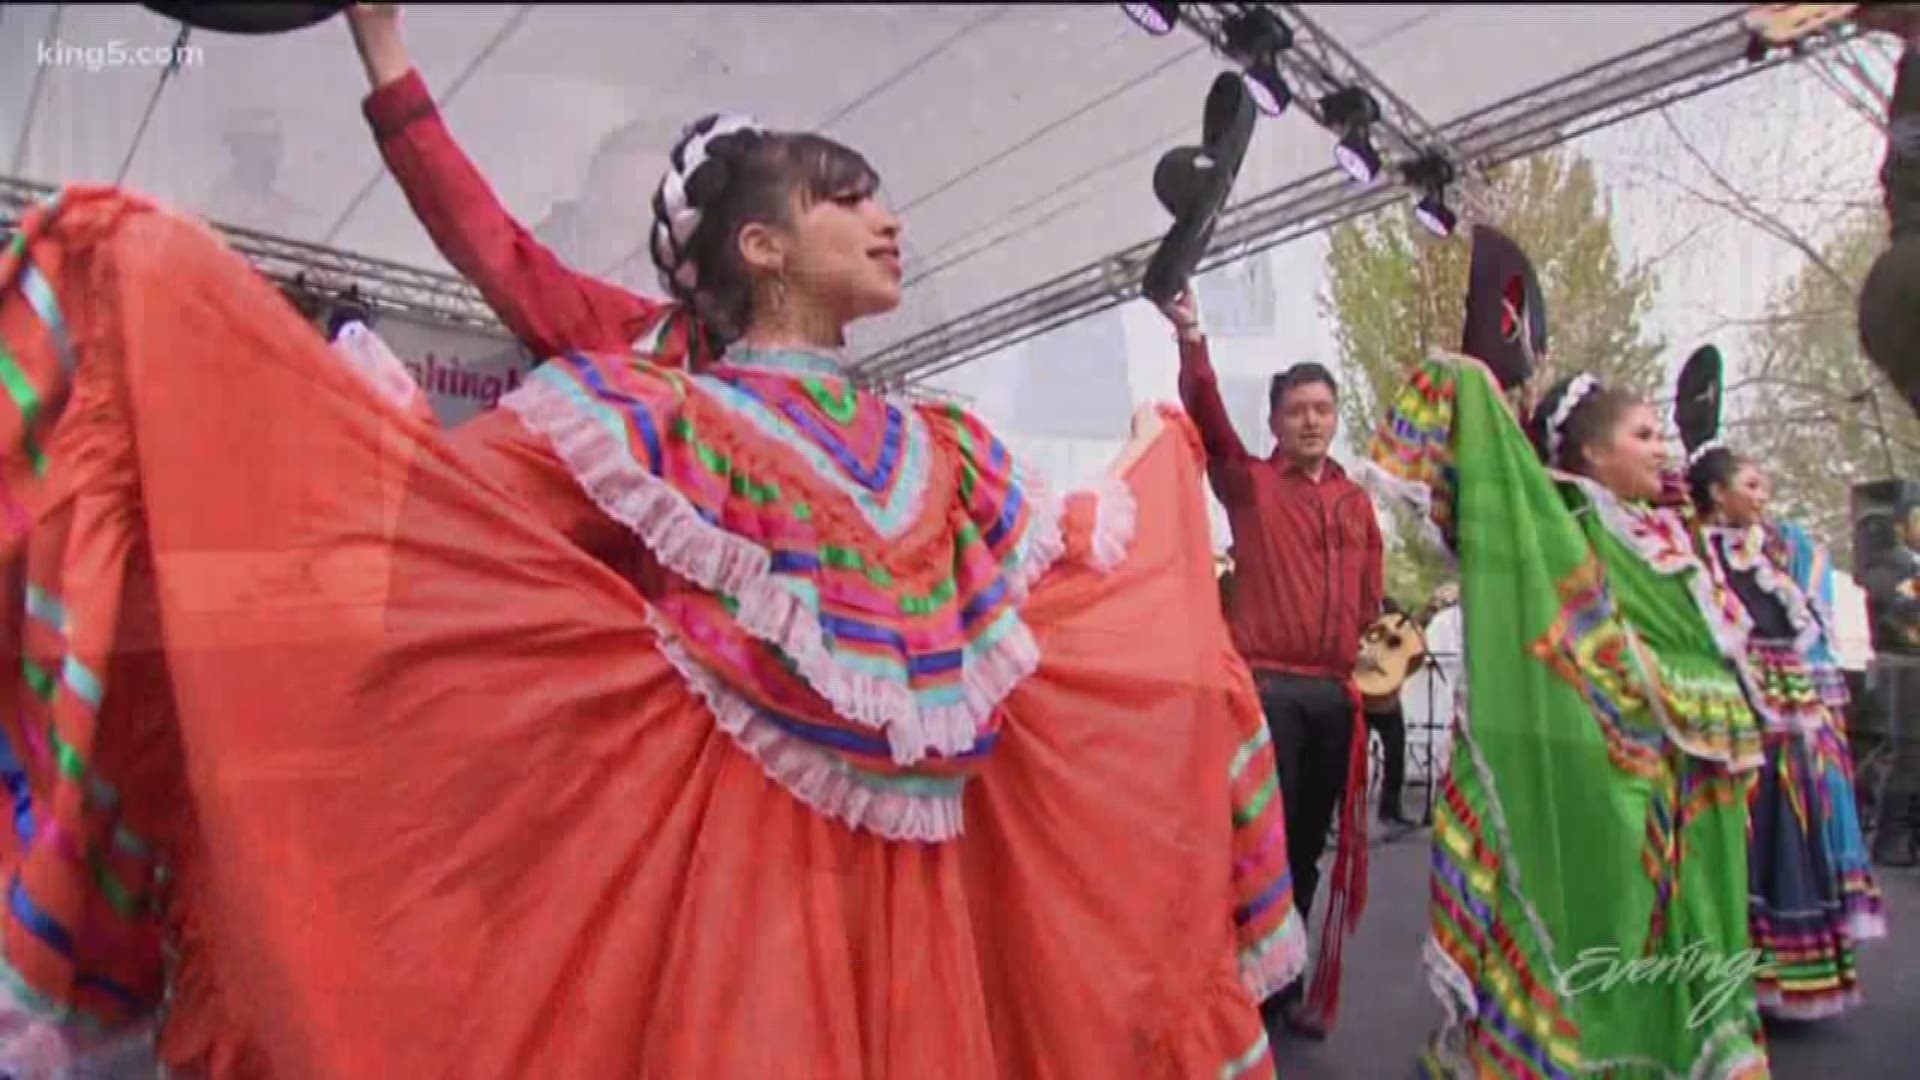 The first in-school mariachi program in Washington has plenty to celebrate during the Apple Blossom Festival. Sponsored by Washington's Playground.